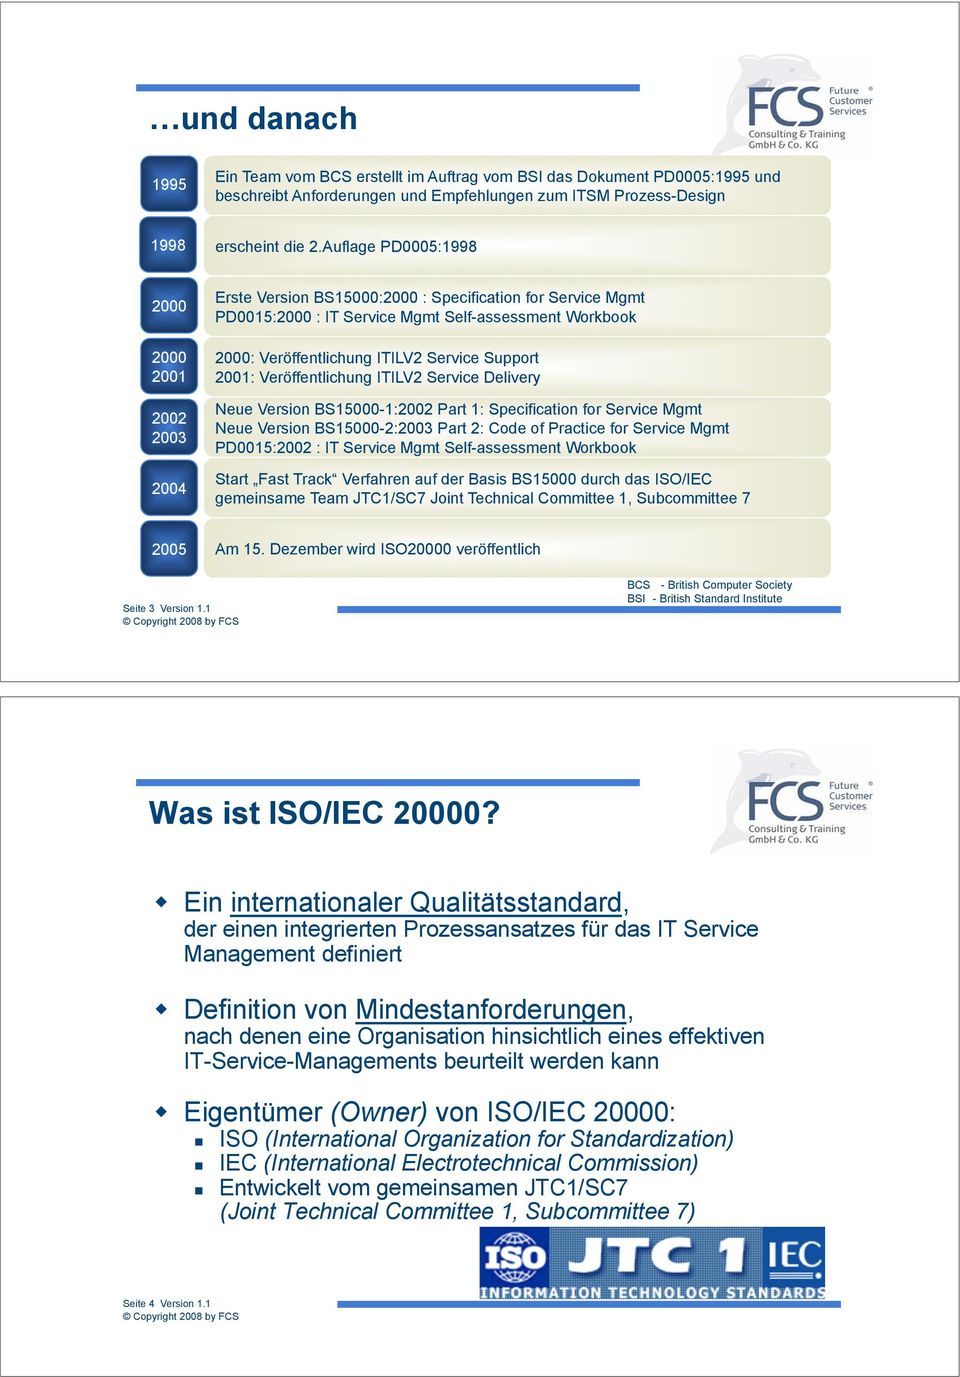 Service Support 2001: Veröffentlichung ITILV2 Service Delivery Neue Version BS15000-1:2002 Part 1: Specification for Service Mgmt Neue Version BS15000-2:2003 Part 2: Code of Practice for Service Mgmt